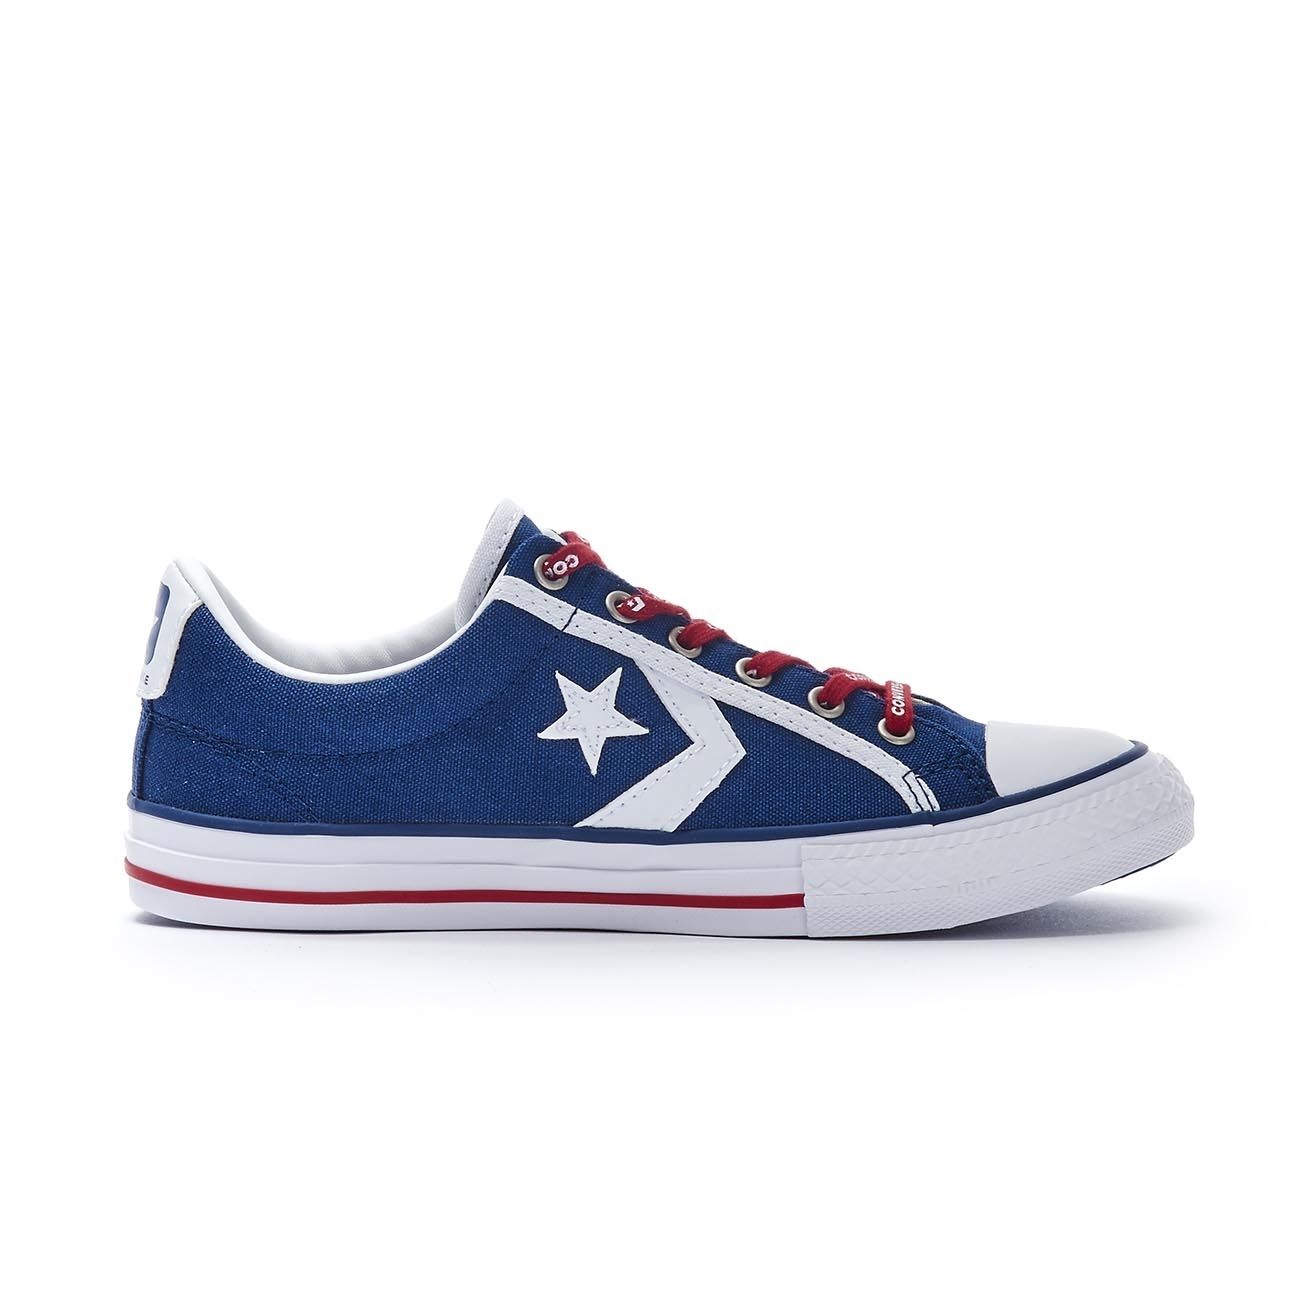 CONVERSE SNEAKERS STAR PLAYER EV OX Kid Navy white red ... أشخاص مشهورين